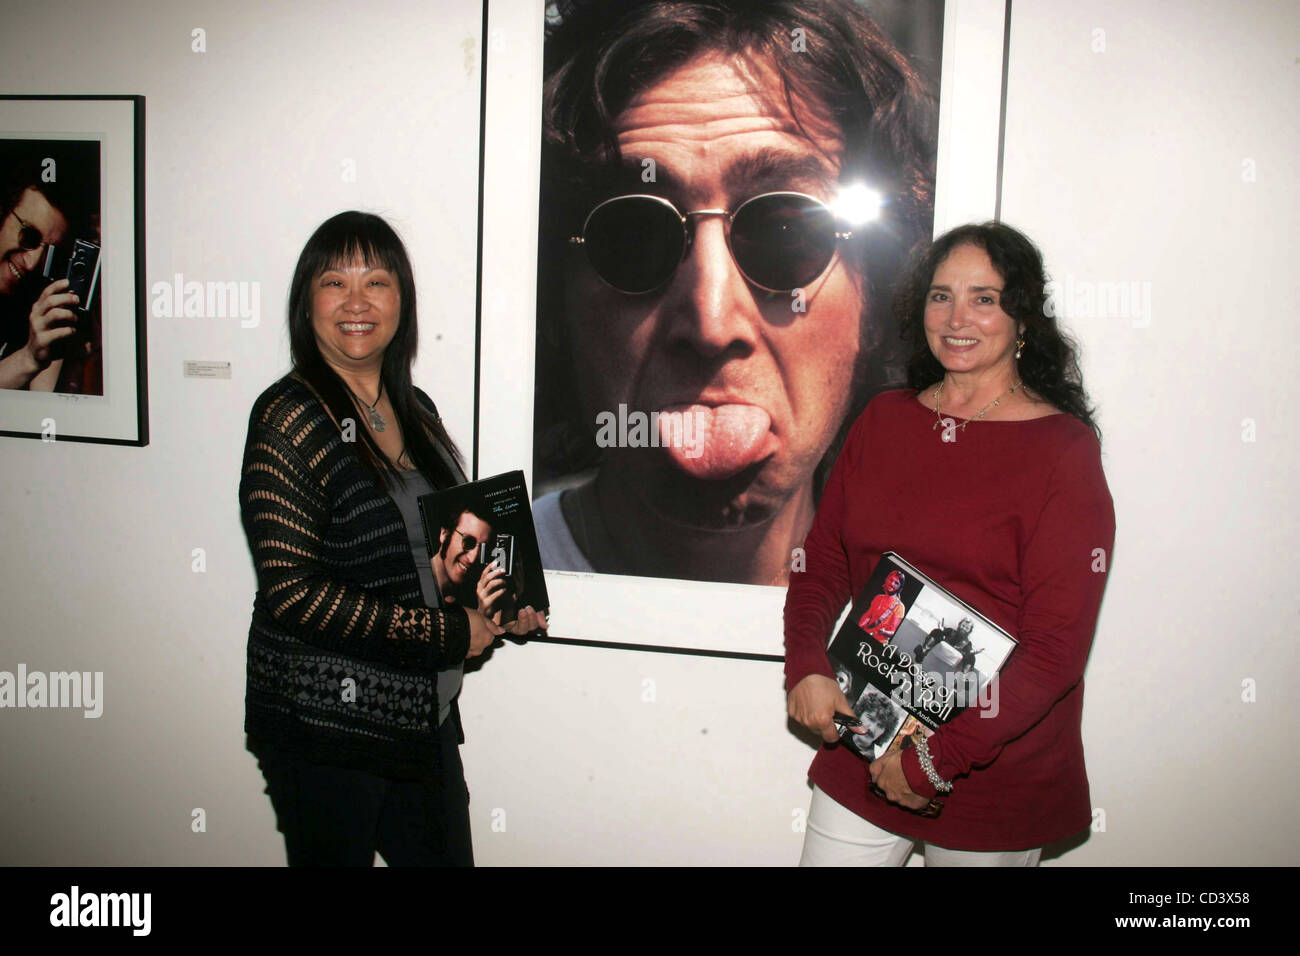 June 11, 2008 - New York, New York, U.S. - MAY PANG, JOHN LENNON'S FORMER GIRLFRIEND A HAS  A BOOK PARTY TO PROMOTE HER BOOK, ''INSTAMATIC KARMA'' ALONG WITH NANCY LEE ANDREWS (RINGO STARR'S FORMER GIRLFRIEND) TO PROMOTE HER NEWLY RELEASED BOOK, '' A DOSE OF ROCK ''N'' ROLL'' AT THE JUNE KELLY GALLE Stock Photo